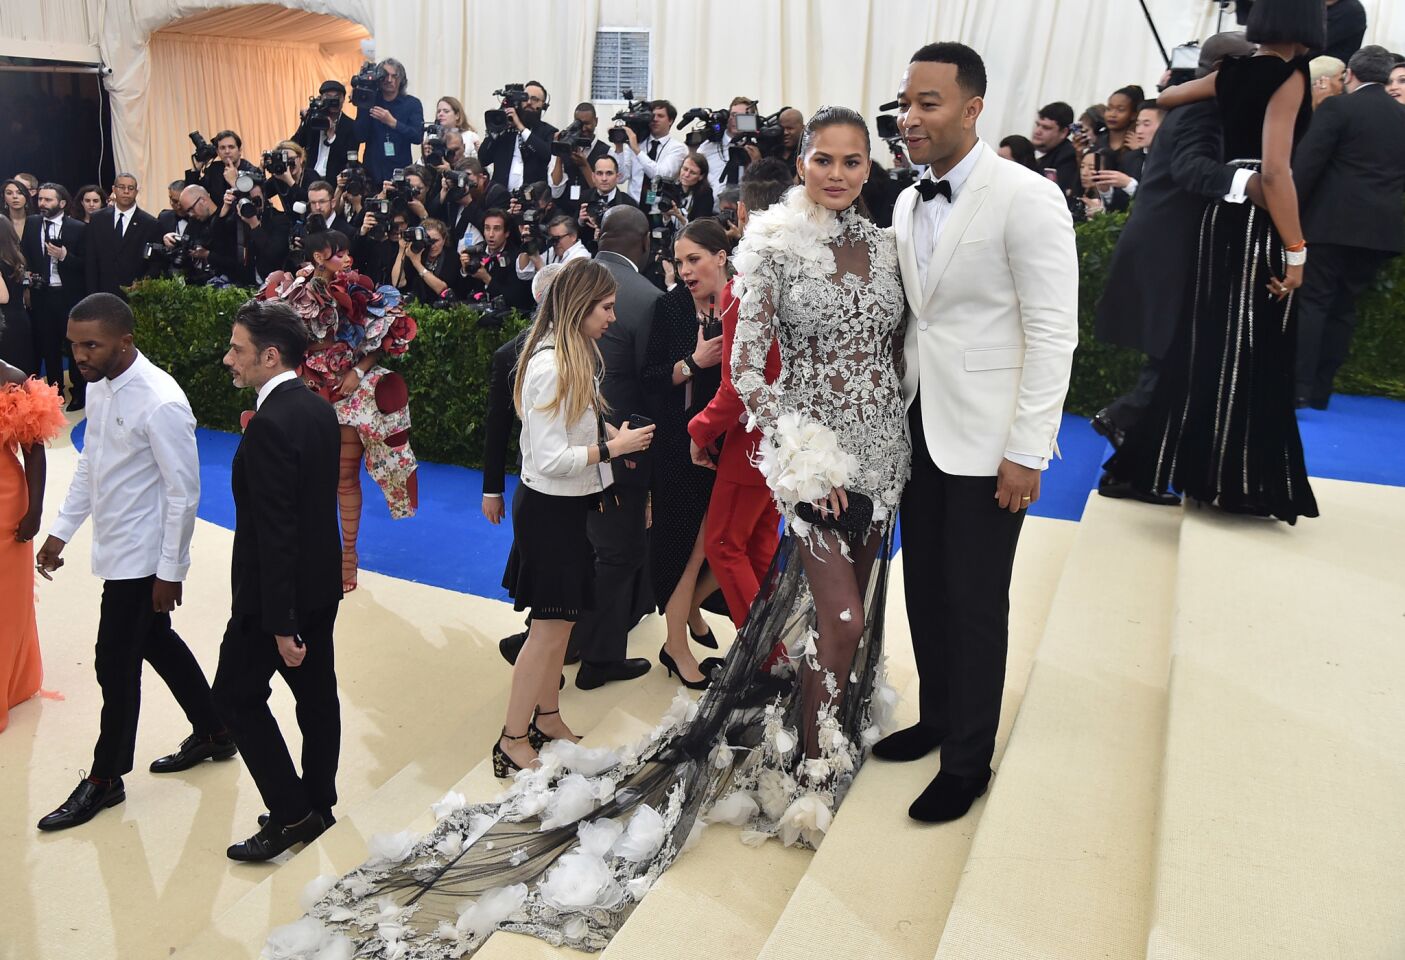 Chrissy Teigen and John Legend attend the "Rei Kawakubo/Comme des Garcons: Art of the In-Between" Costume Institute Gala at Metropolitan Museum of Art on May 1 in New York.